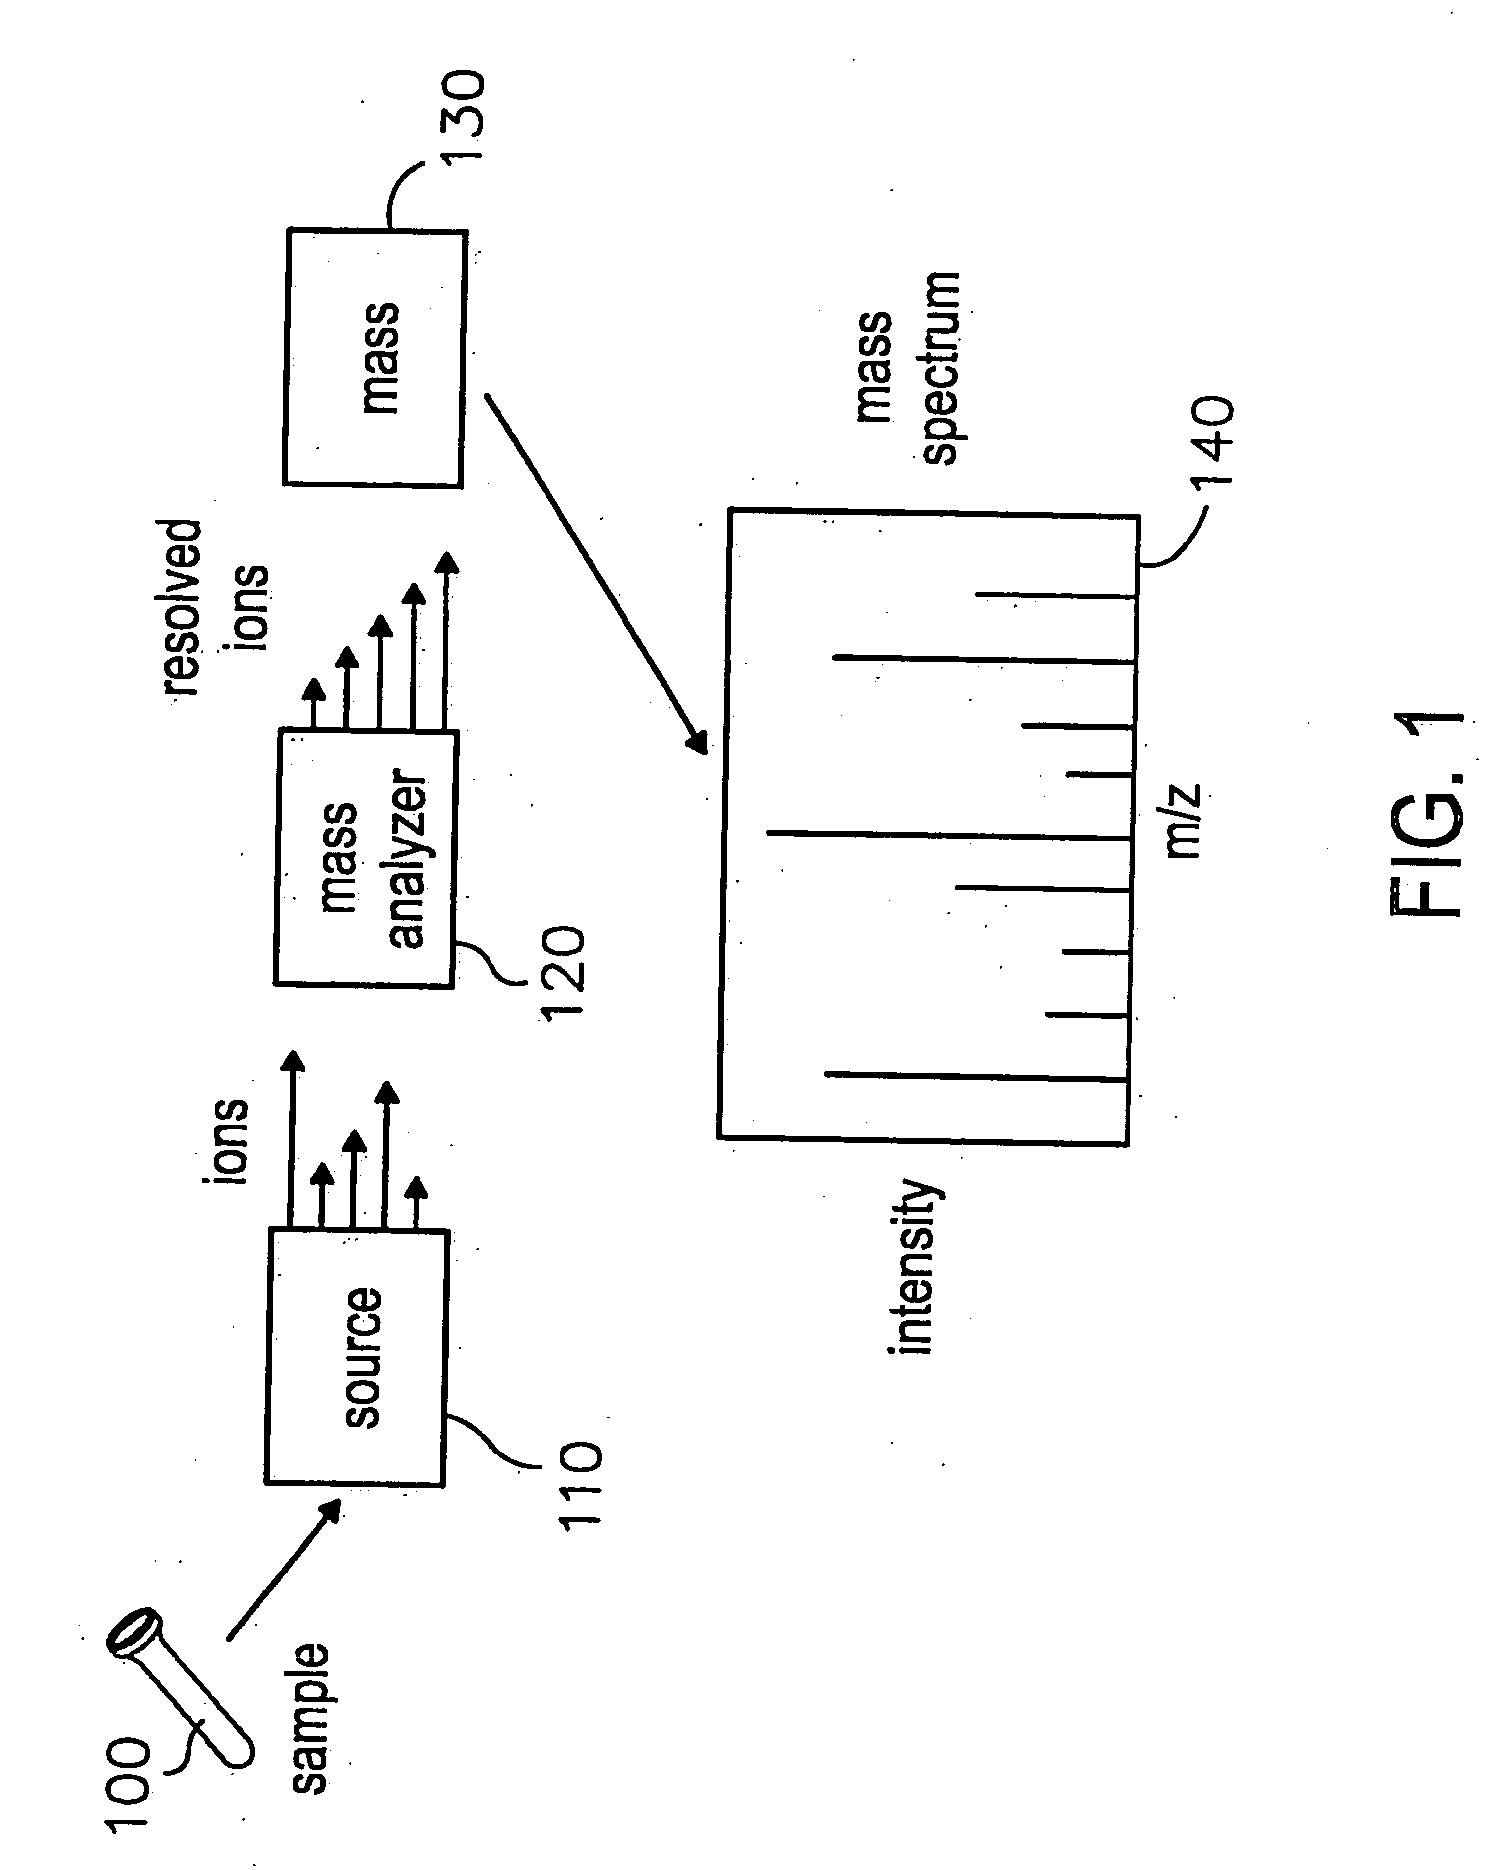 System and methods for navigating and visualizing multi-dimensional biological data